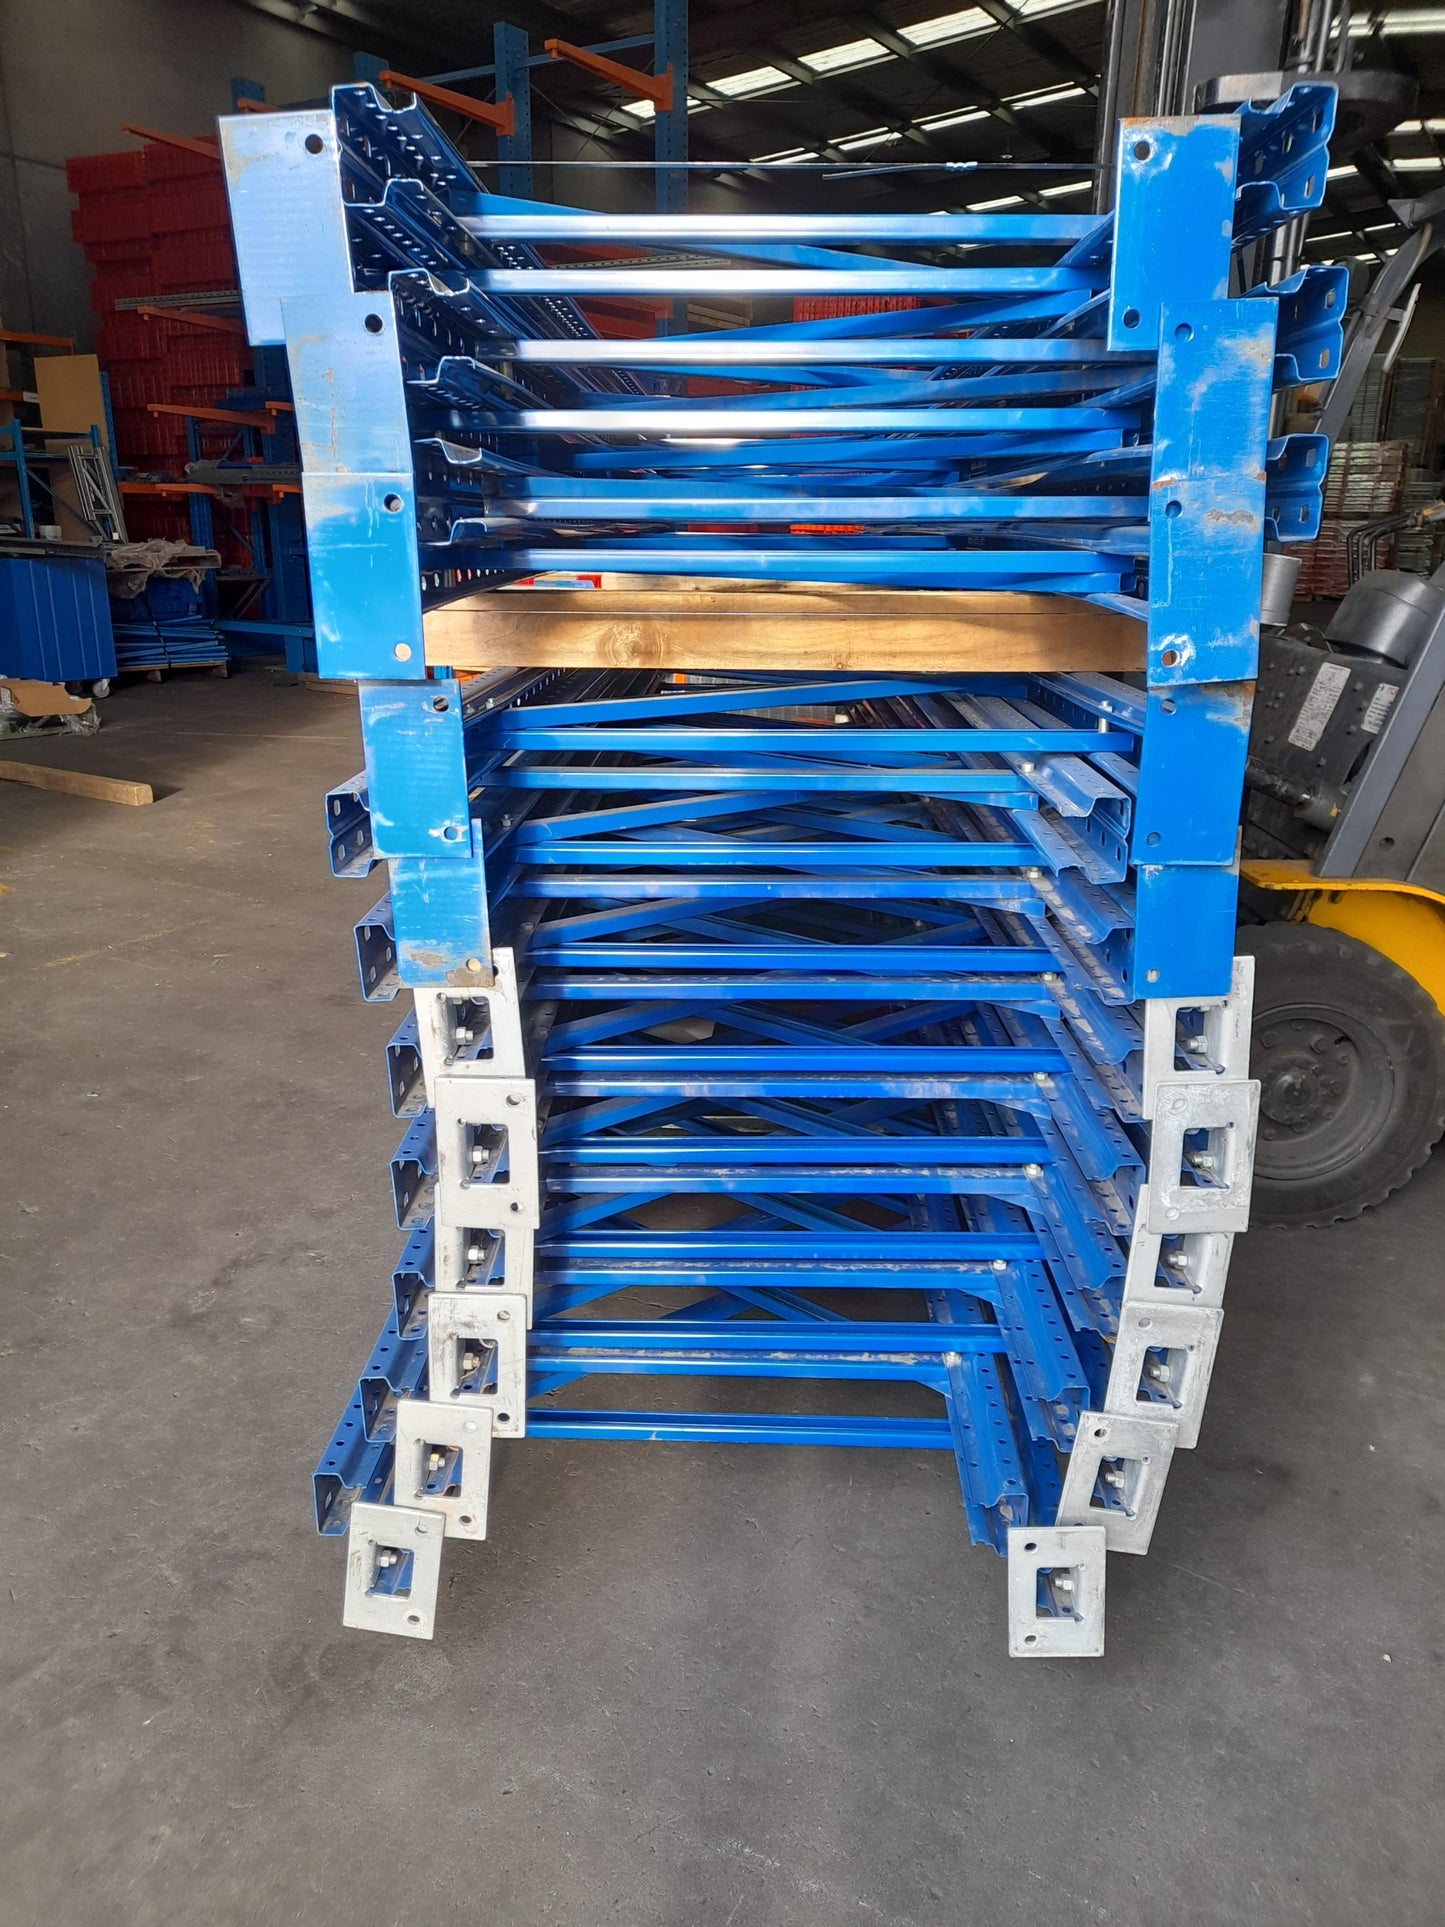 ReadyRack Used Second Hand Pallet Racking